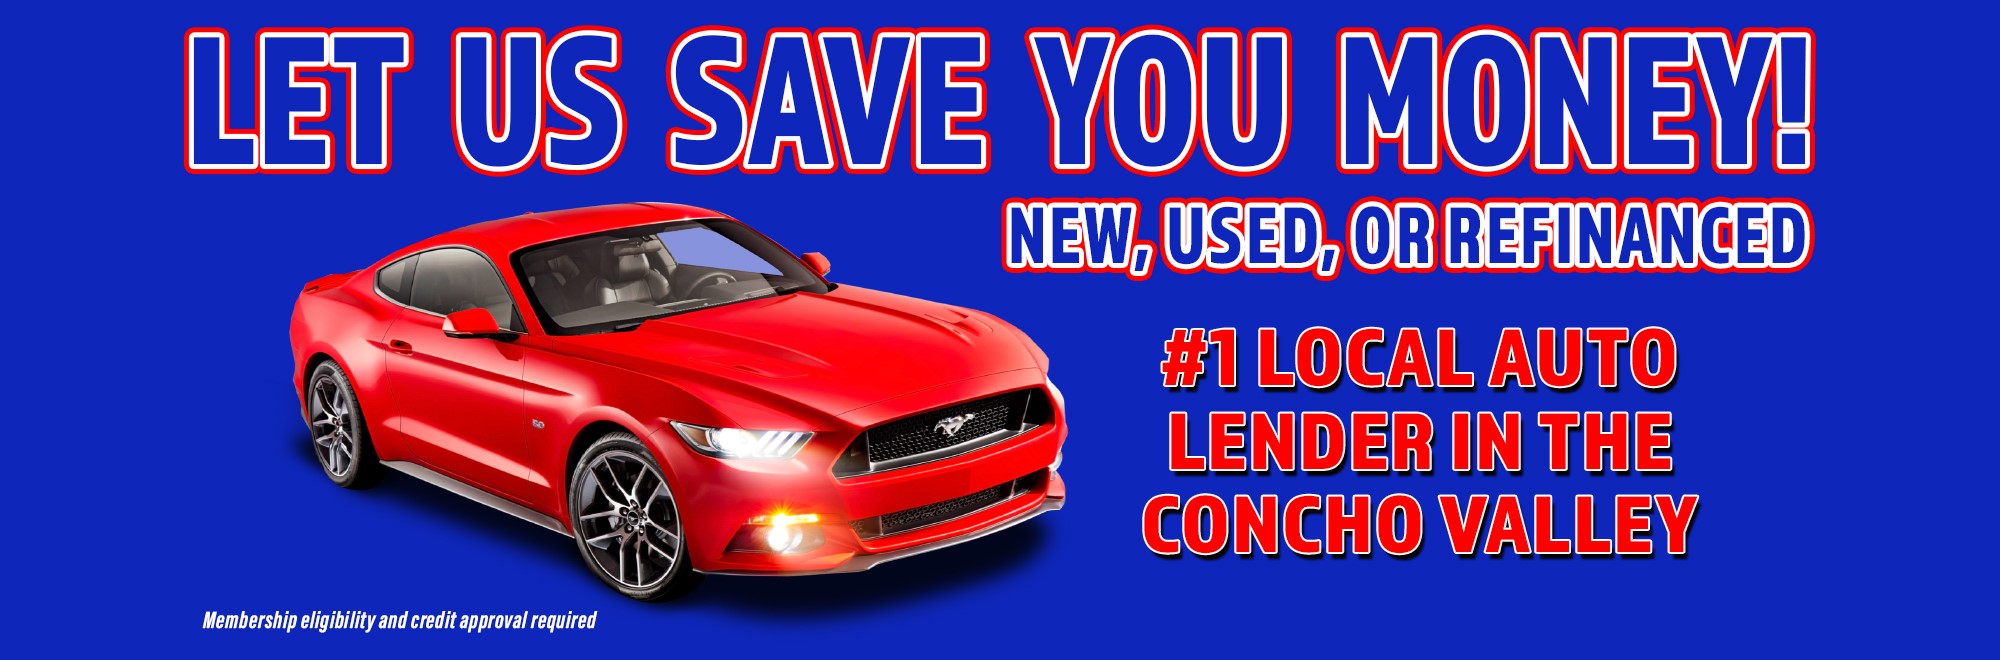 Let us save you money on new, used, or refinance. #1 local auto lender in the Concho Valley. Membership eligibility and credit approval required.